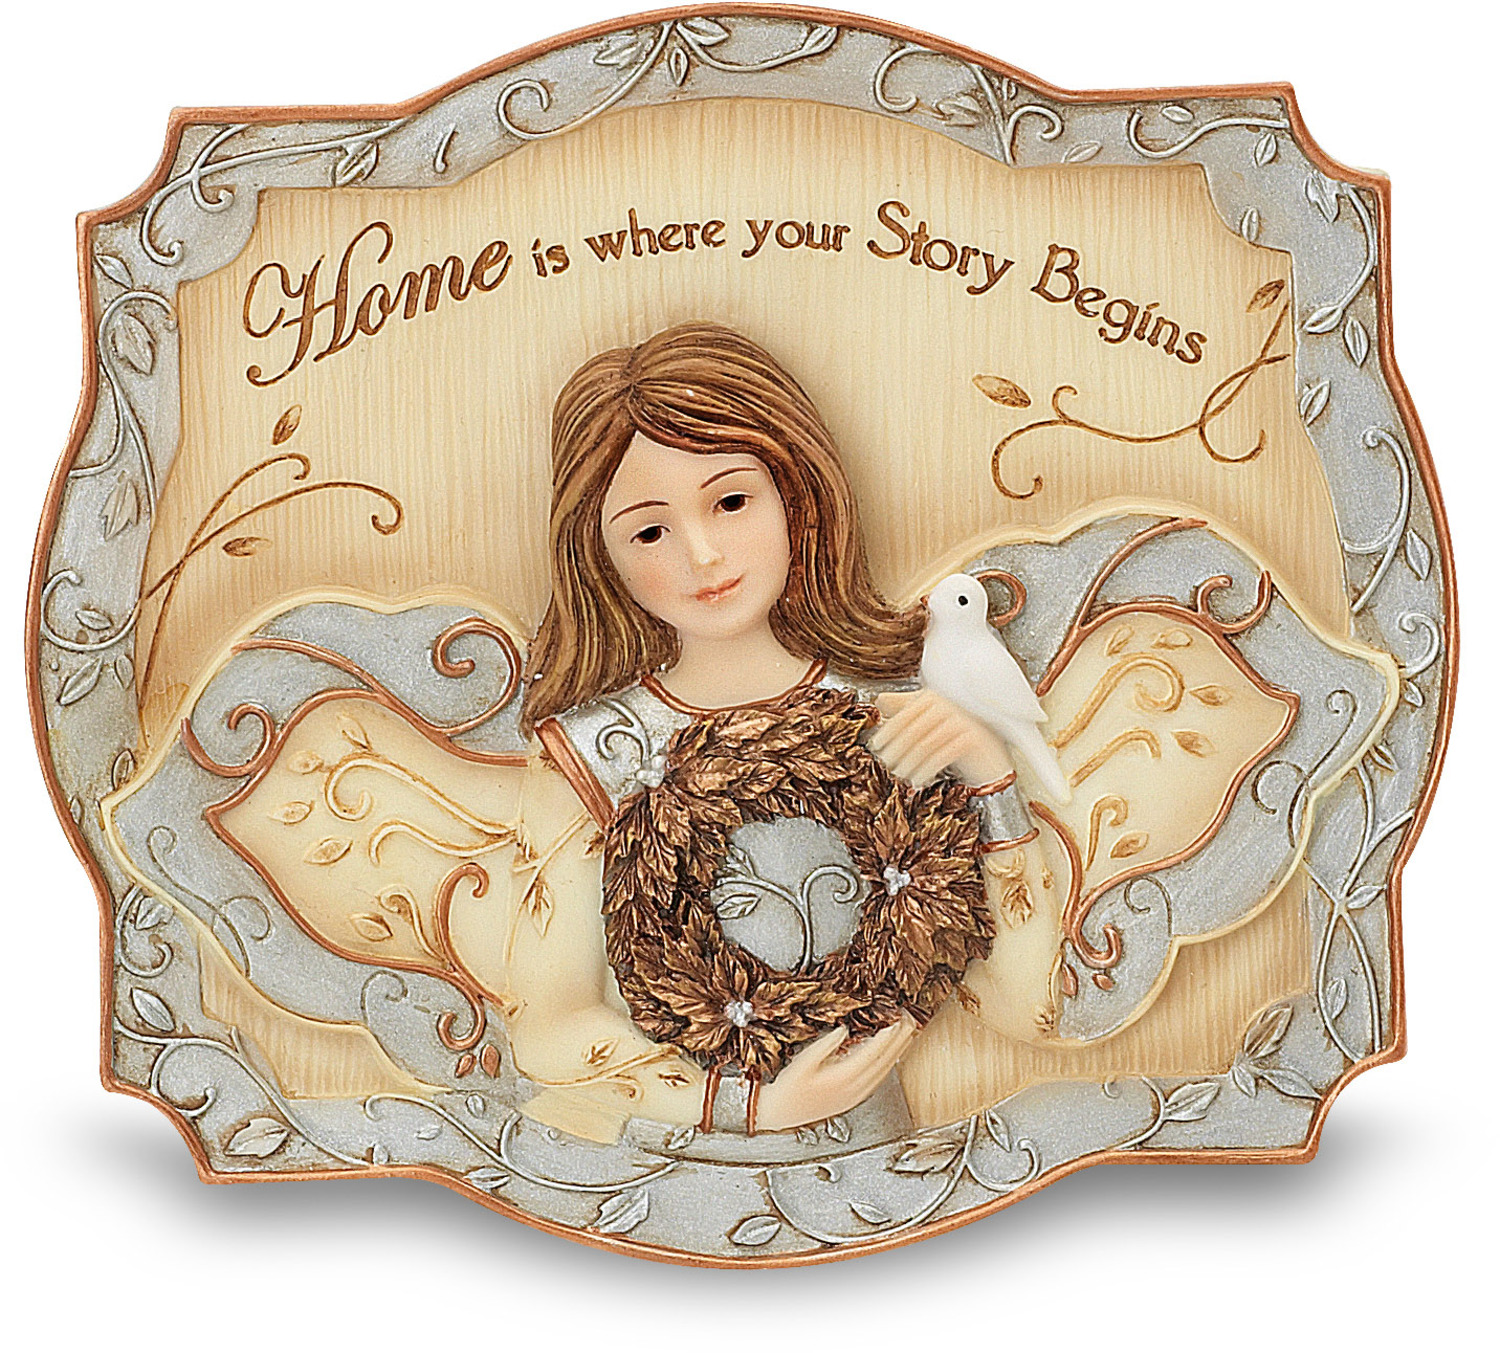 Home by Elements - Home - 3.5" x 4" Self-Standing Plaque